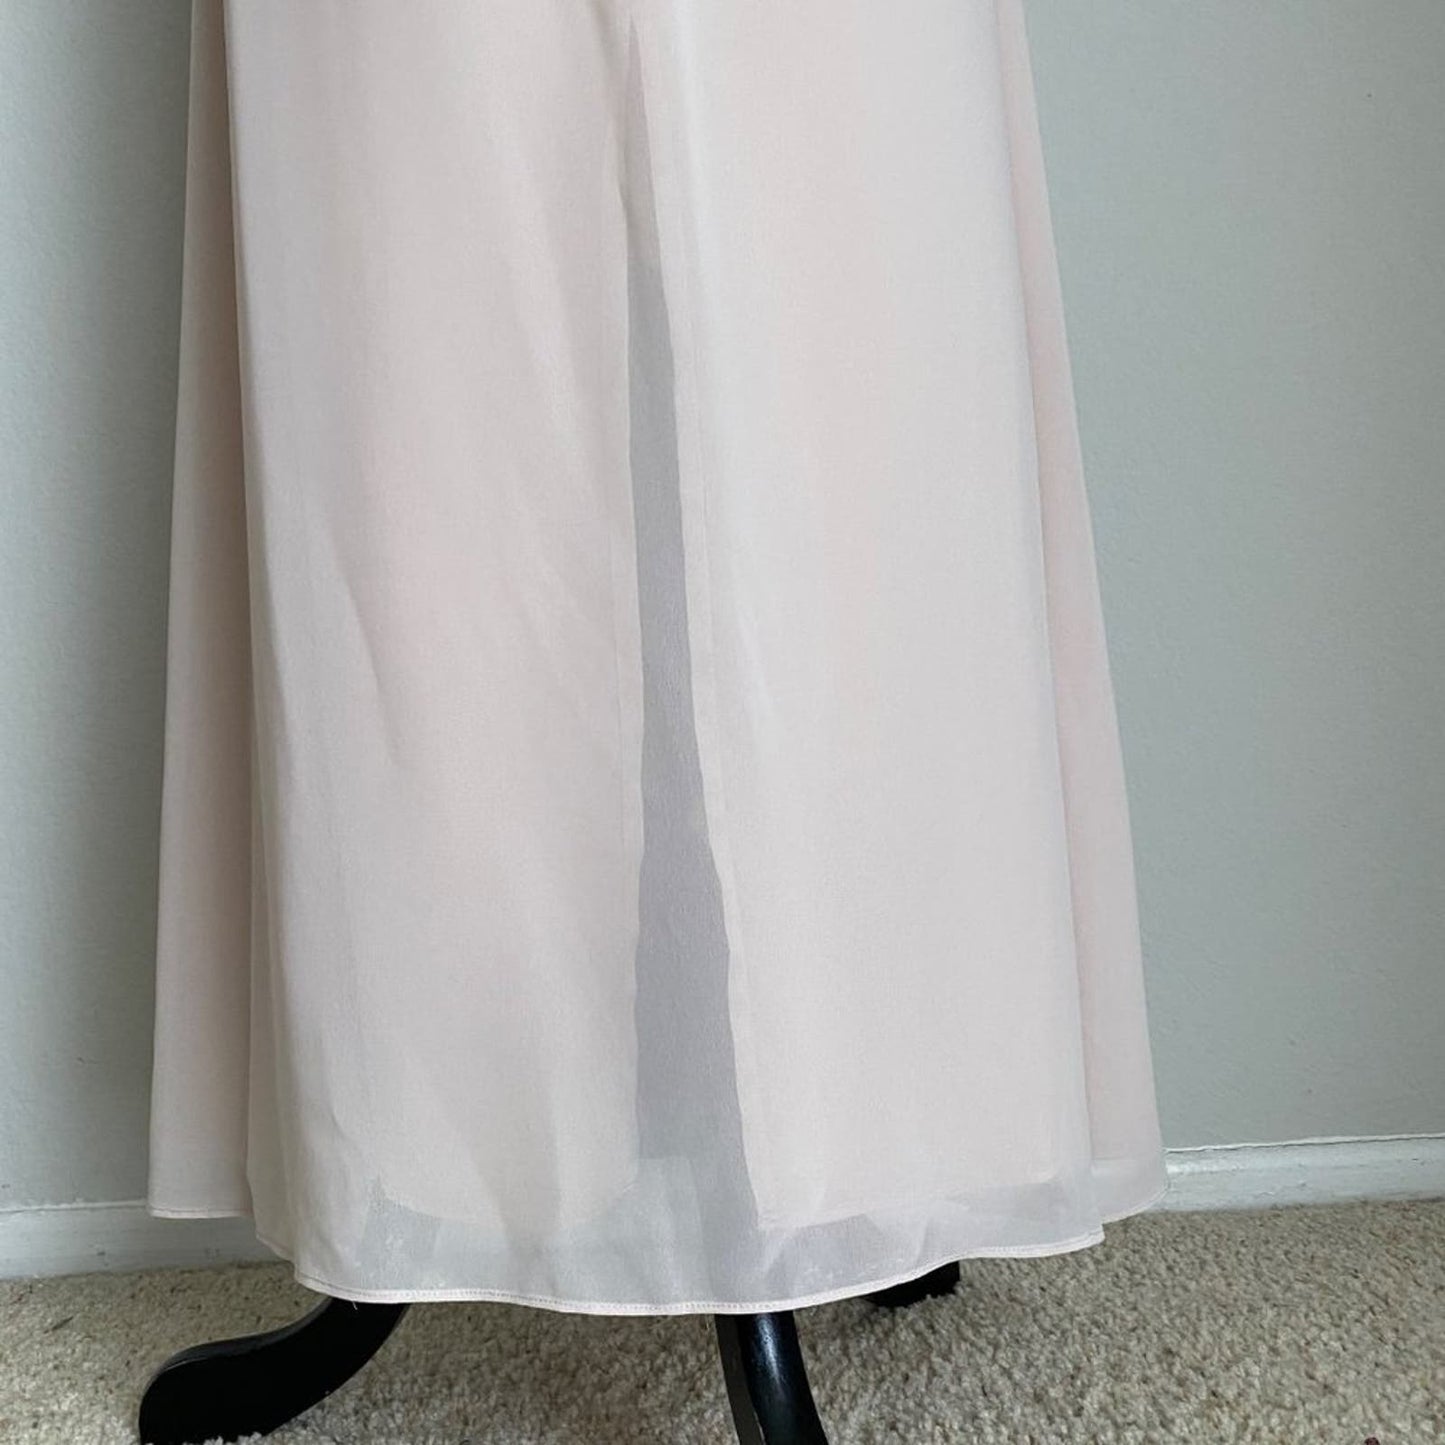 Ceremony sz M pink  sweetheart maxi wedding formal gown